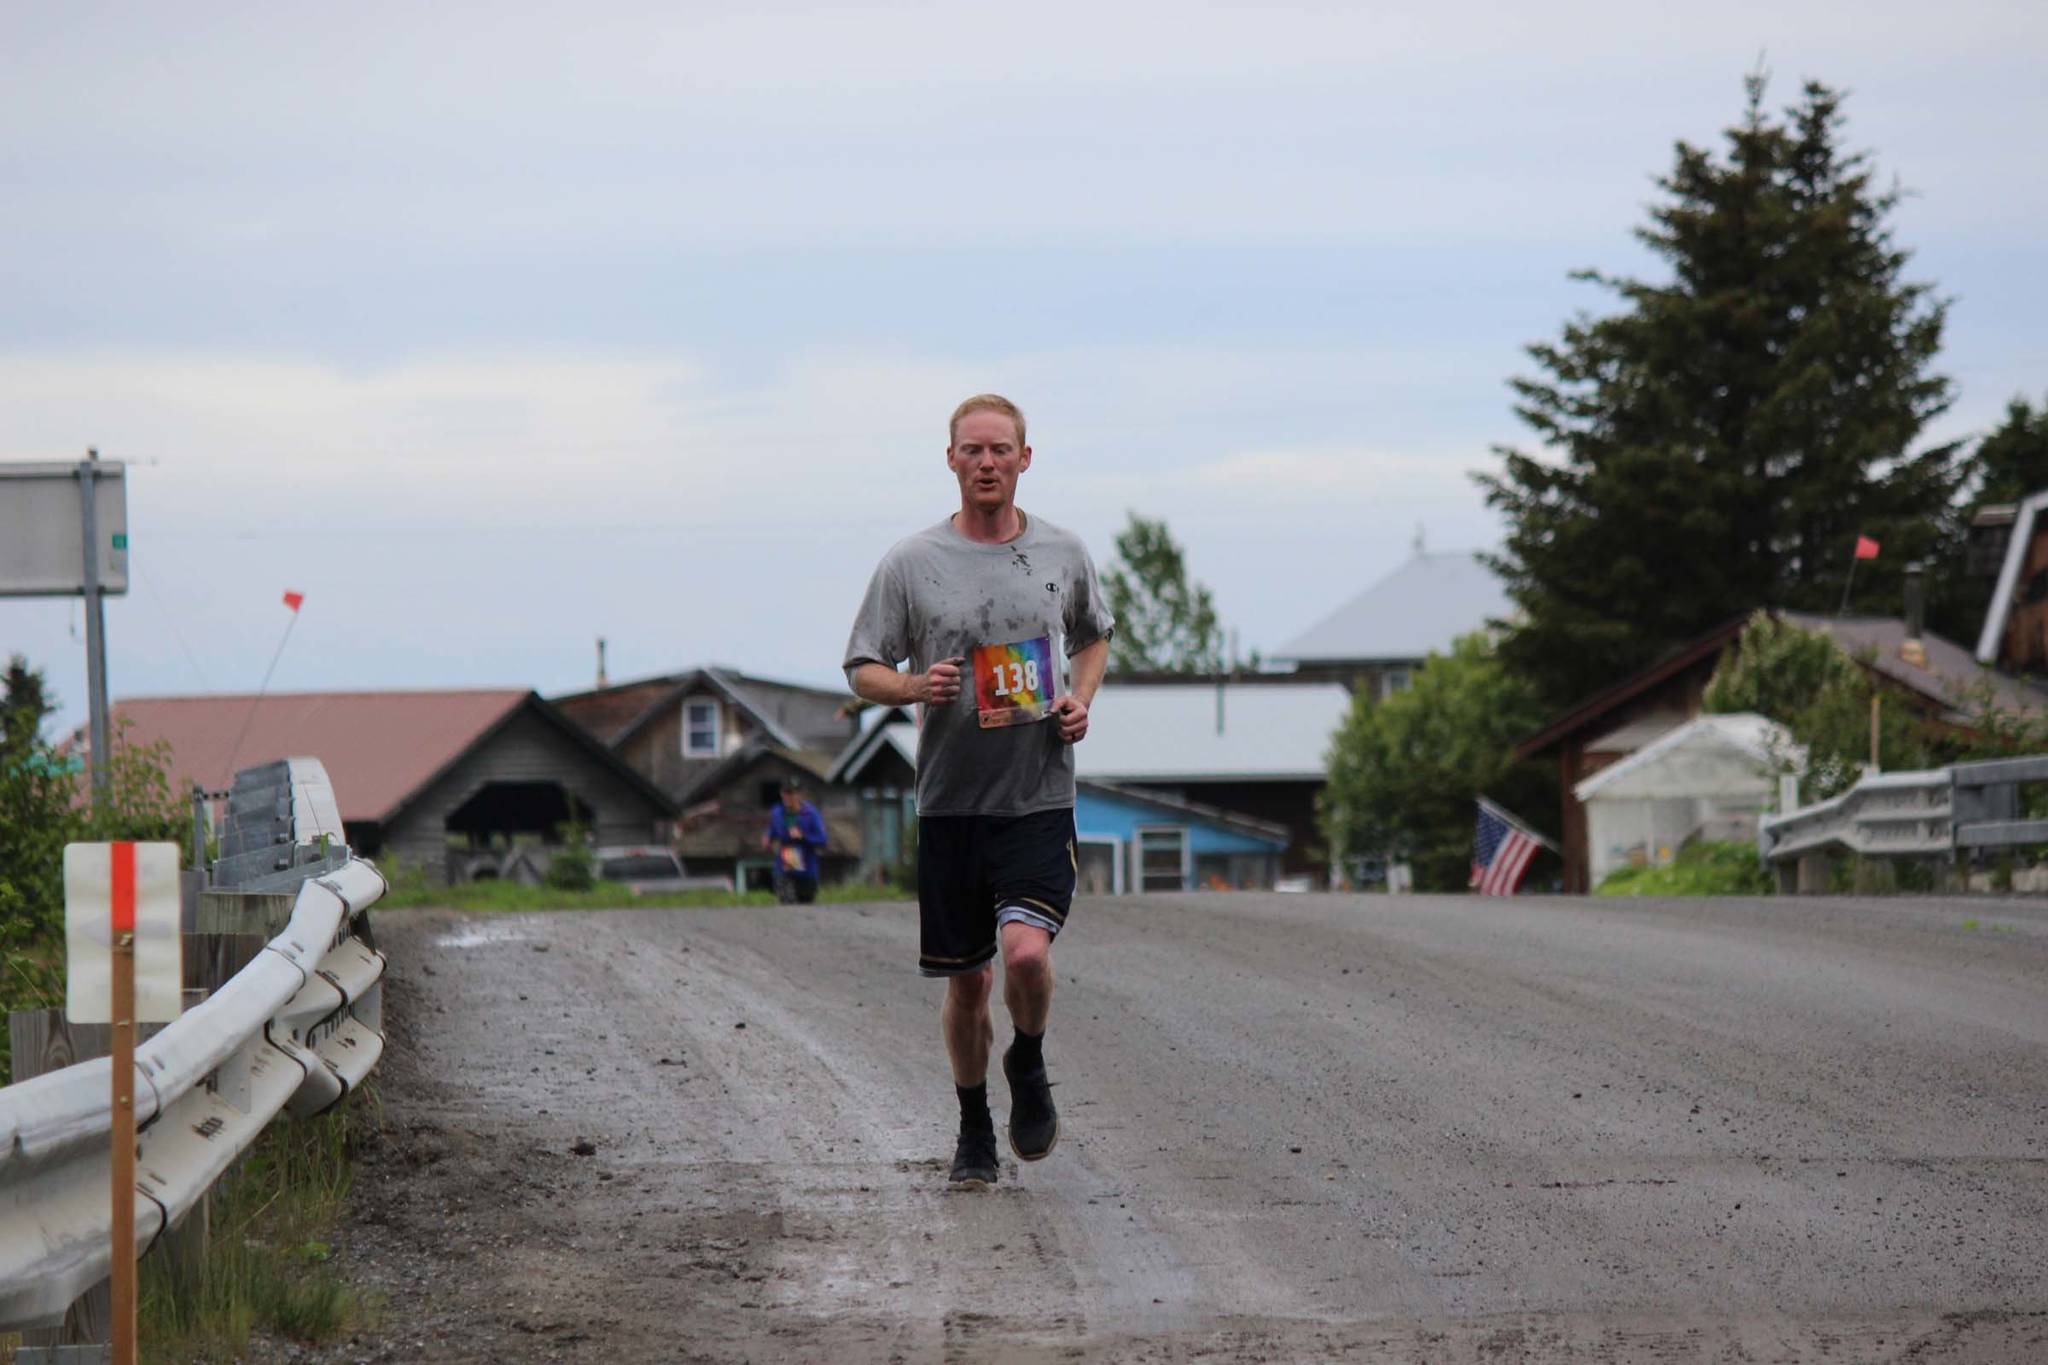 Jesse Hostetter runs through historic Ninilchik Village for the Clam Scramble held Saturday, June 15, 2019 in Ninilchik, Alaska. Begun in the mid 1800s, Ninilchik was established as a settlement for Russian American Company pensioners. Descendants of the the village’s original families still live in the area. (Photo by McKibben Jackinsky)